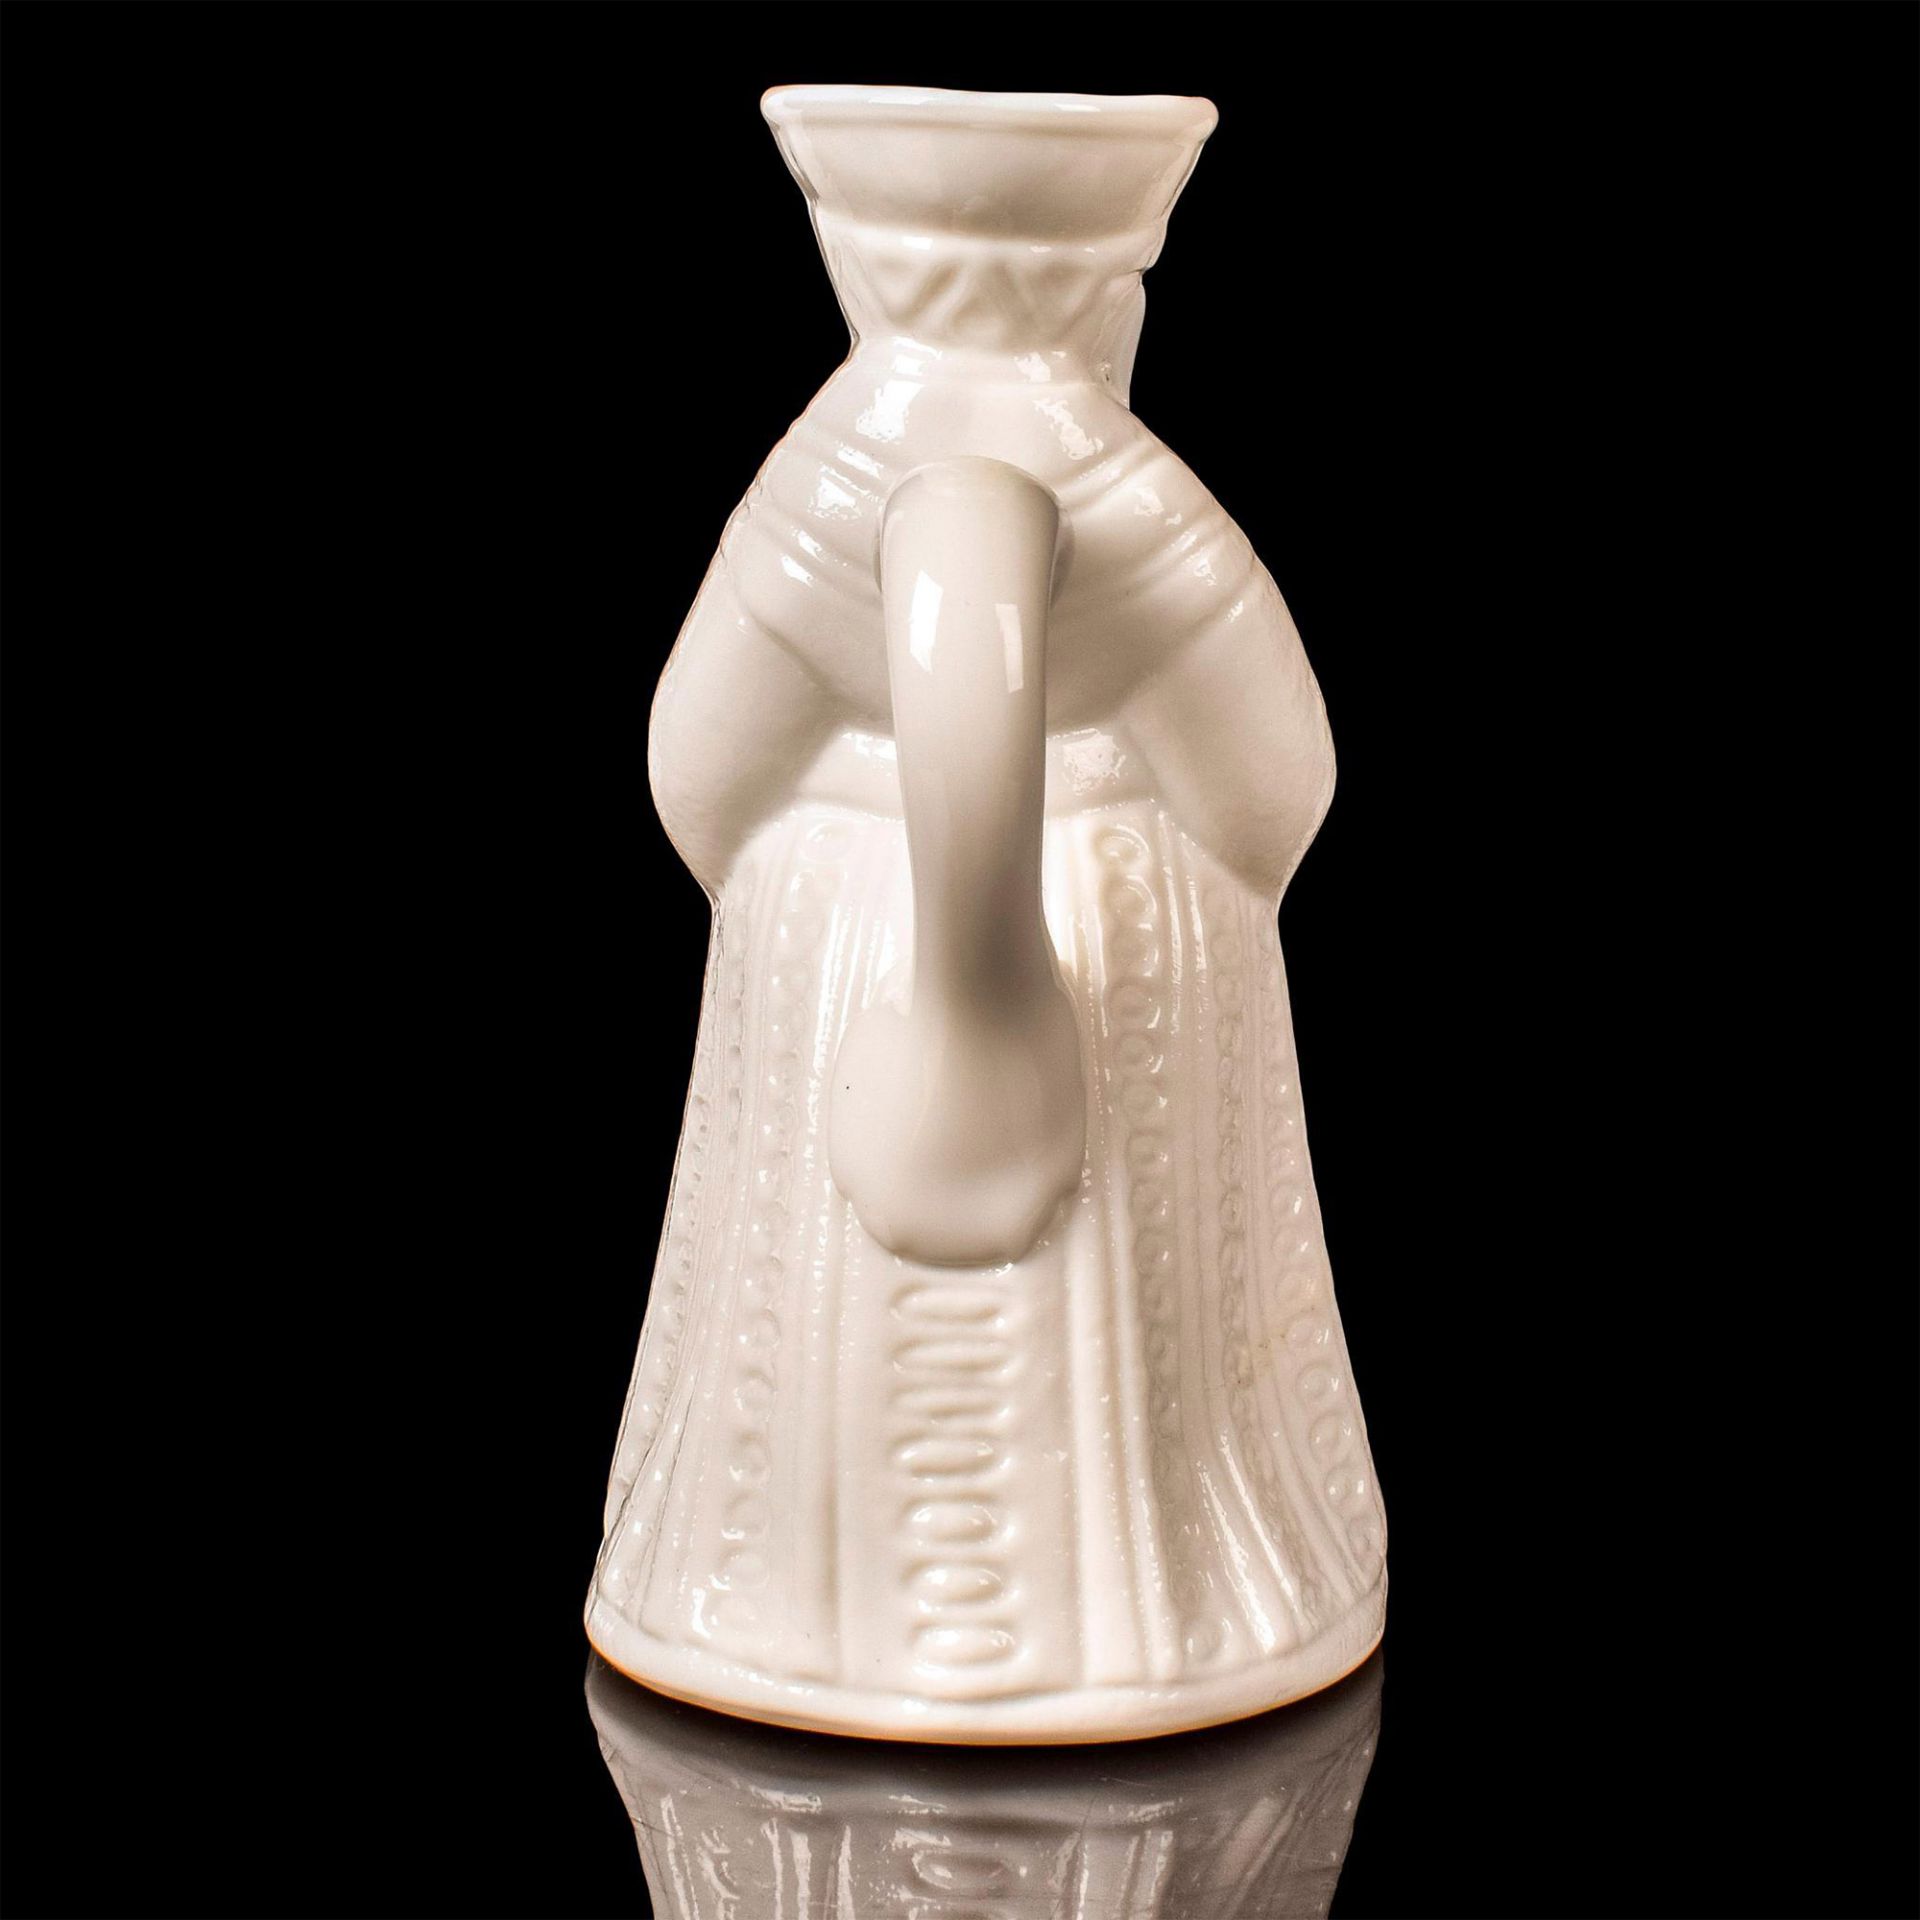 Kanawha Milk Glass Syrup Pitcher, Colonial Woman - Image 3 of 5